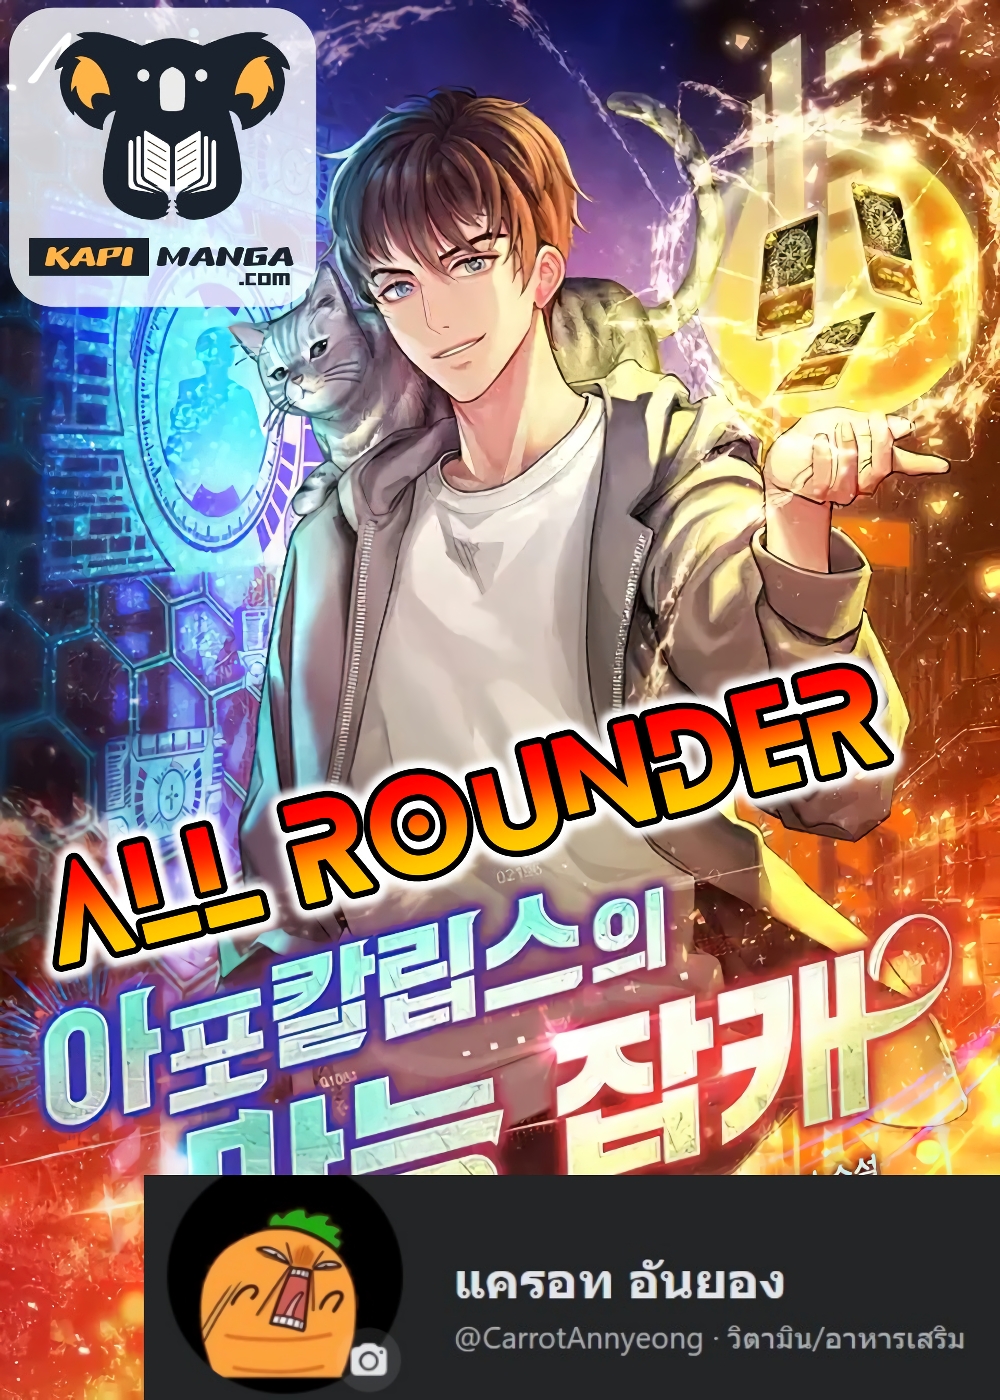 All Rounder 4-4